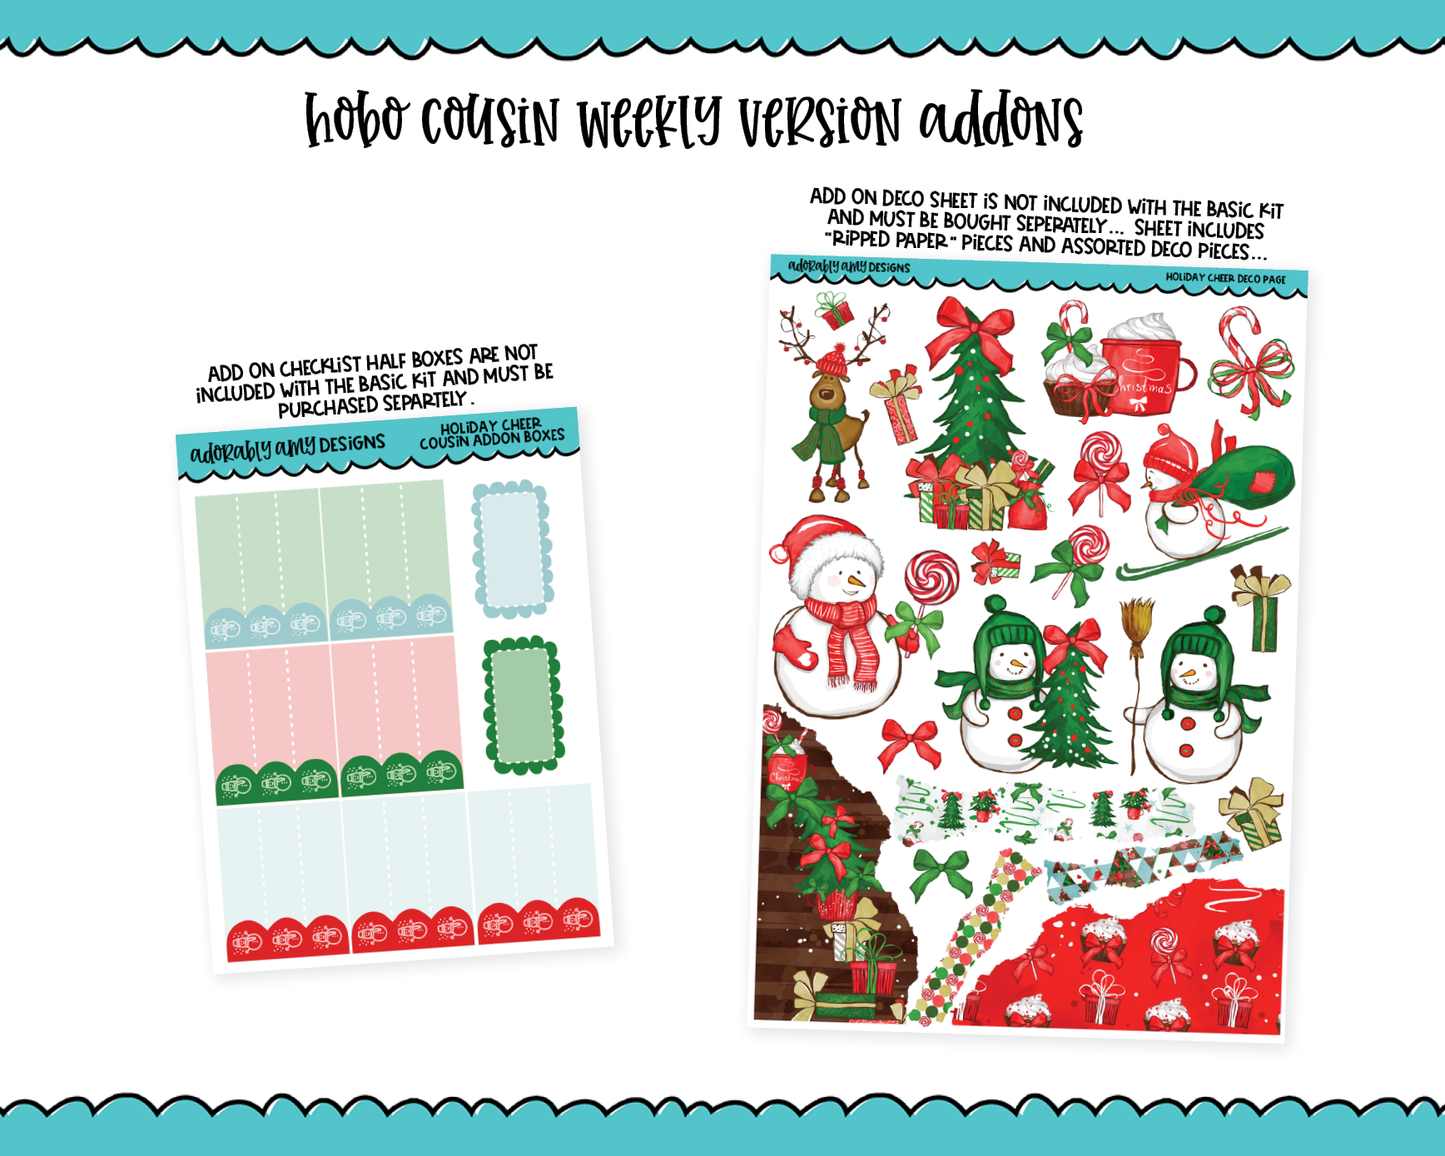 Hobonichi Cousin Weekly Holiday Cheer Christmas Themed Planner Sticker Kit for Hobo Cousin or Similar Planners